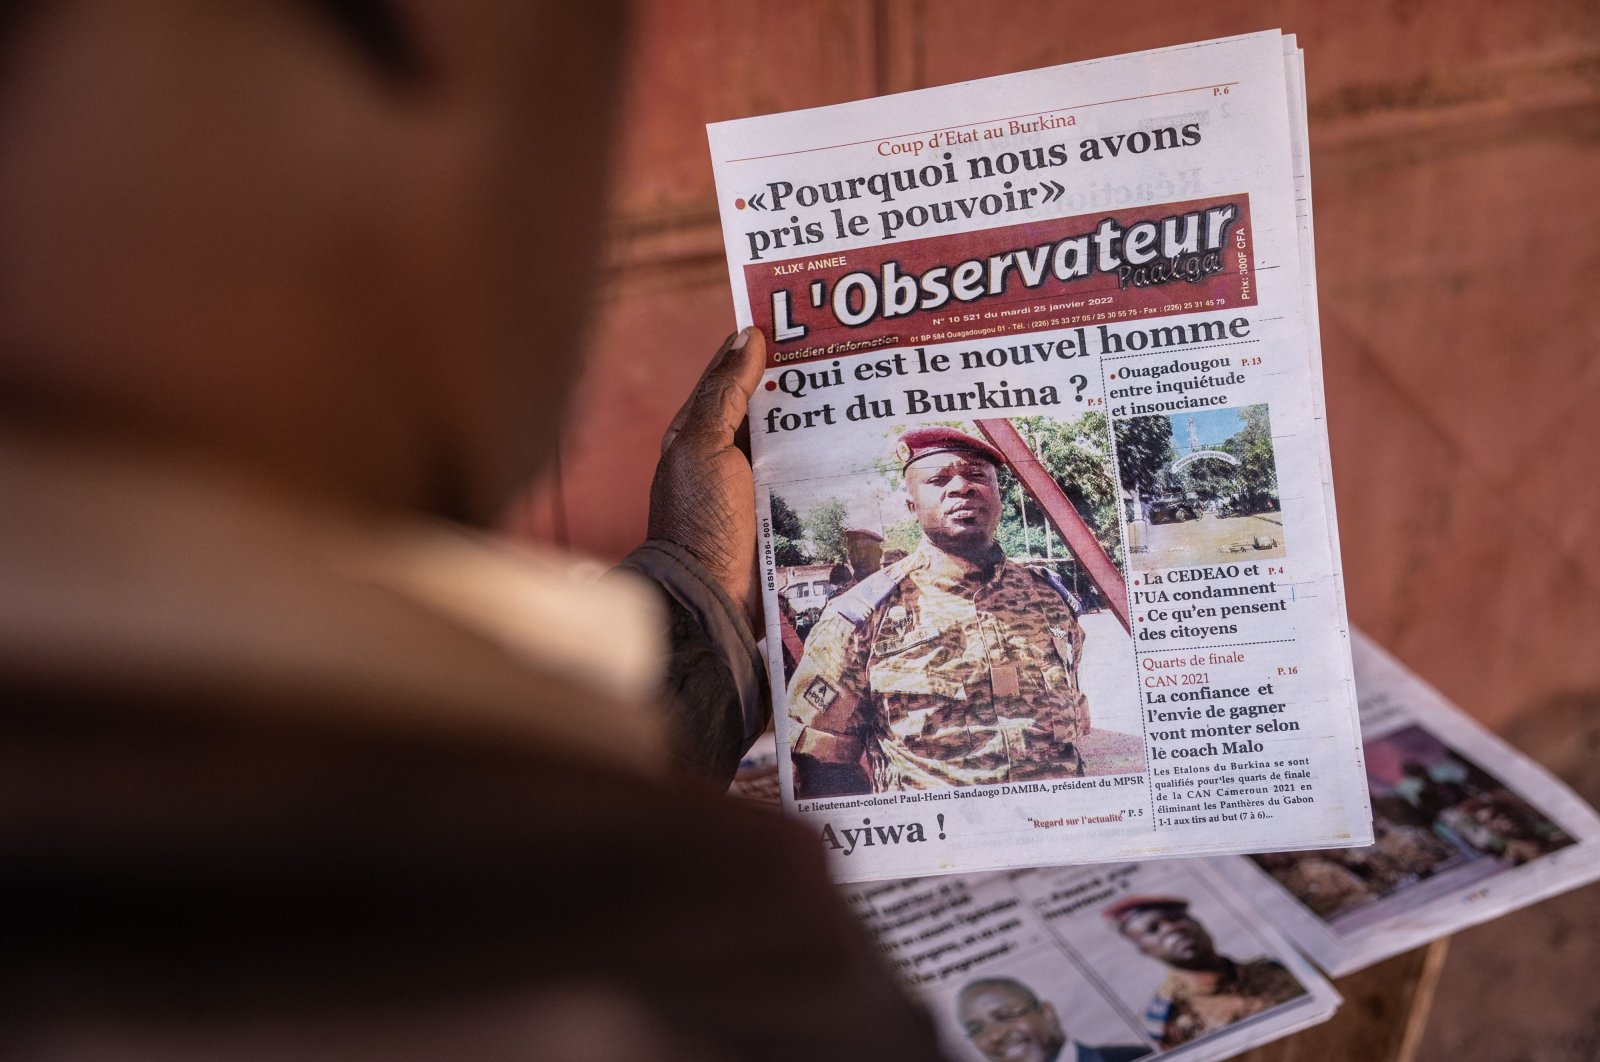 A man buys a newspaper featuring a picture of Paul Henri Sandaogo Damiba, the leader of the mutiny and the Patriotic Movement for the Protection and the Restauration (MPSR), in Ouagadougou, Burkina Faso, Jan. 25, 2022. (AFP Photo)